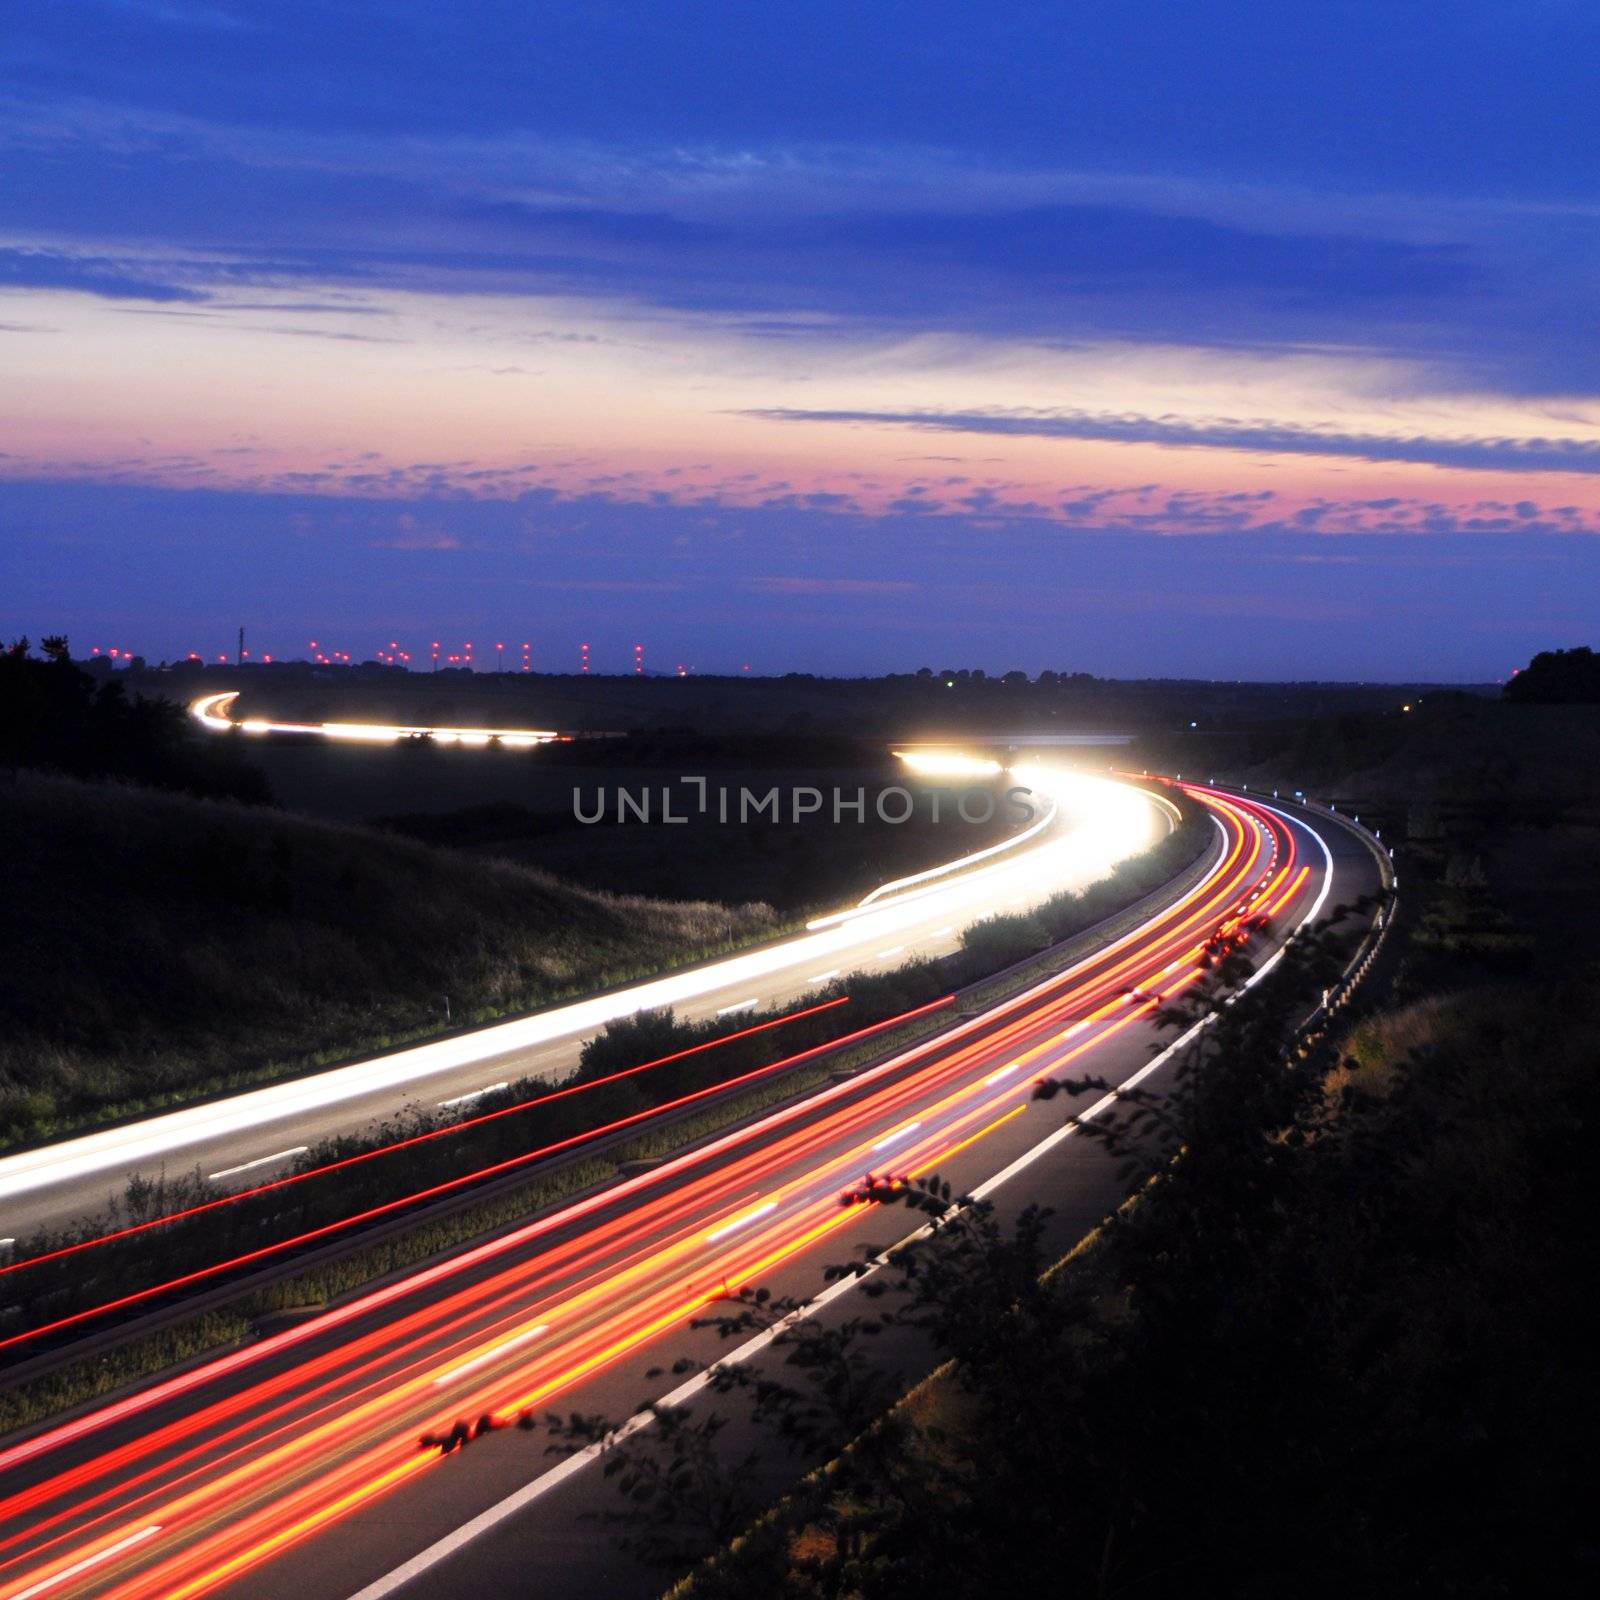 night traffic on busy highway with cars lights and blue sky